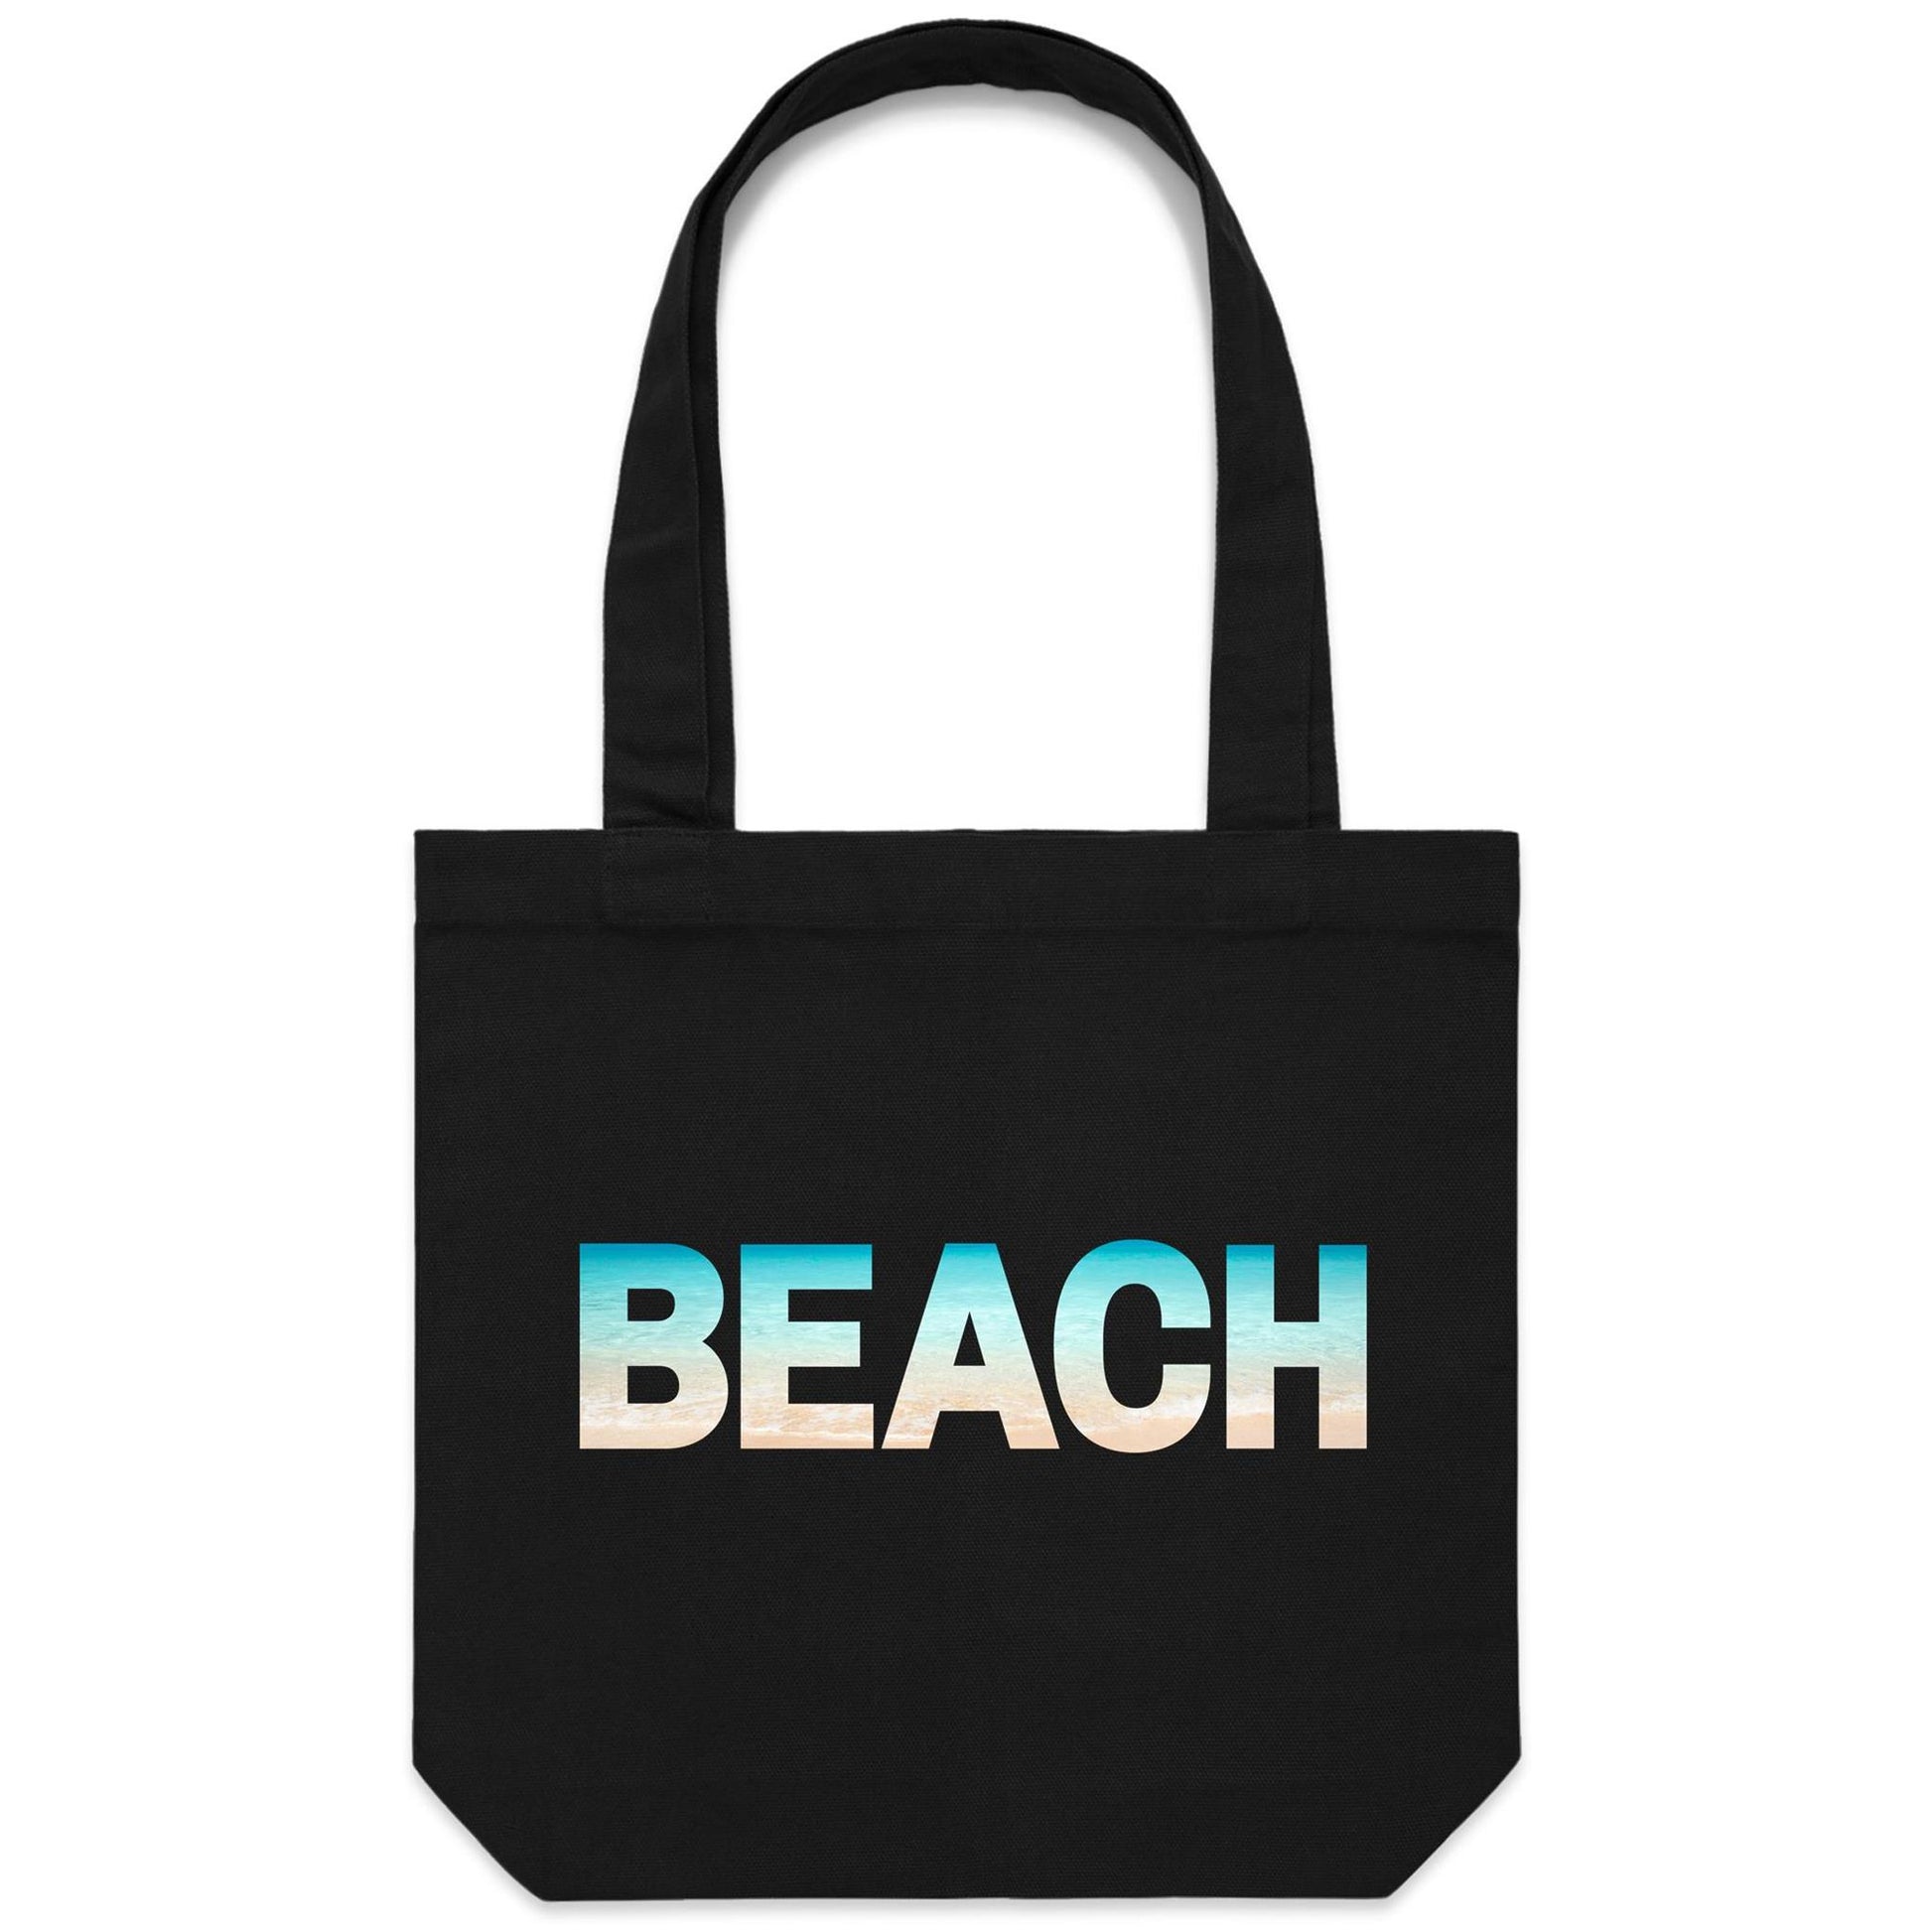 Beach - Canvas Tote Bag Black One-Size Tote Bag Summer